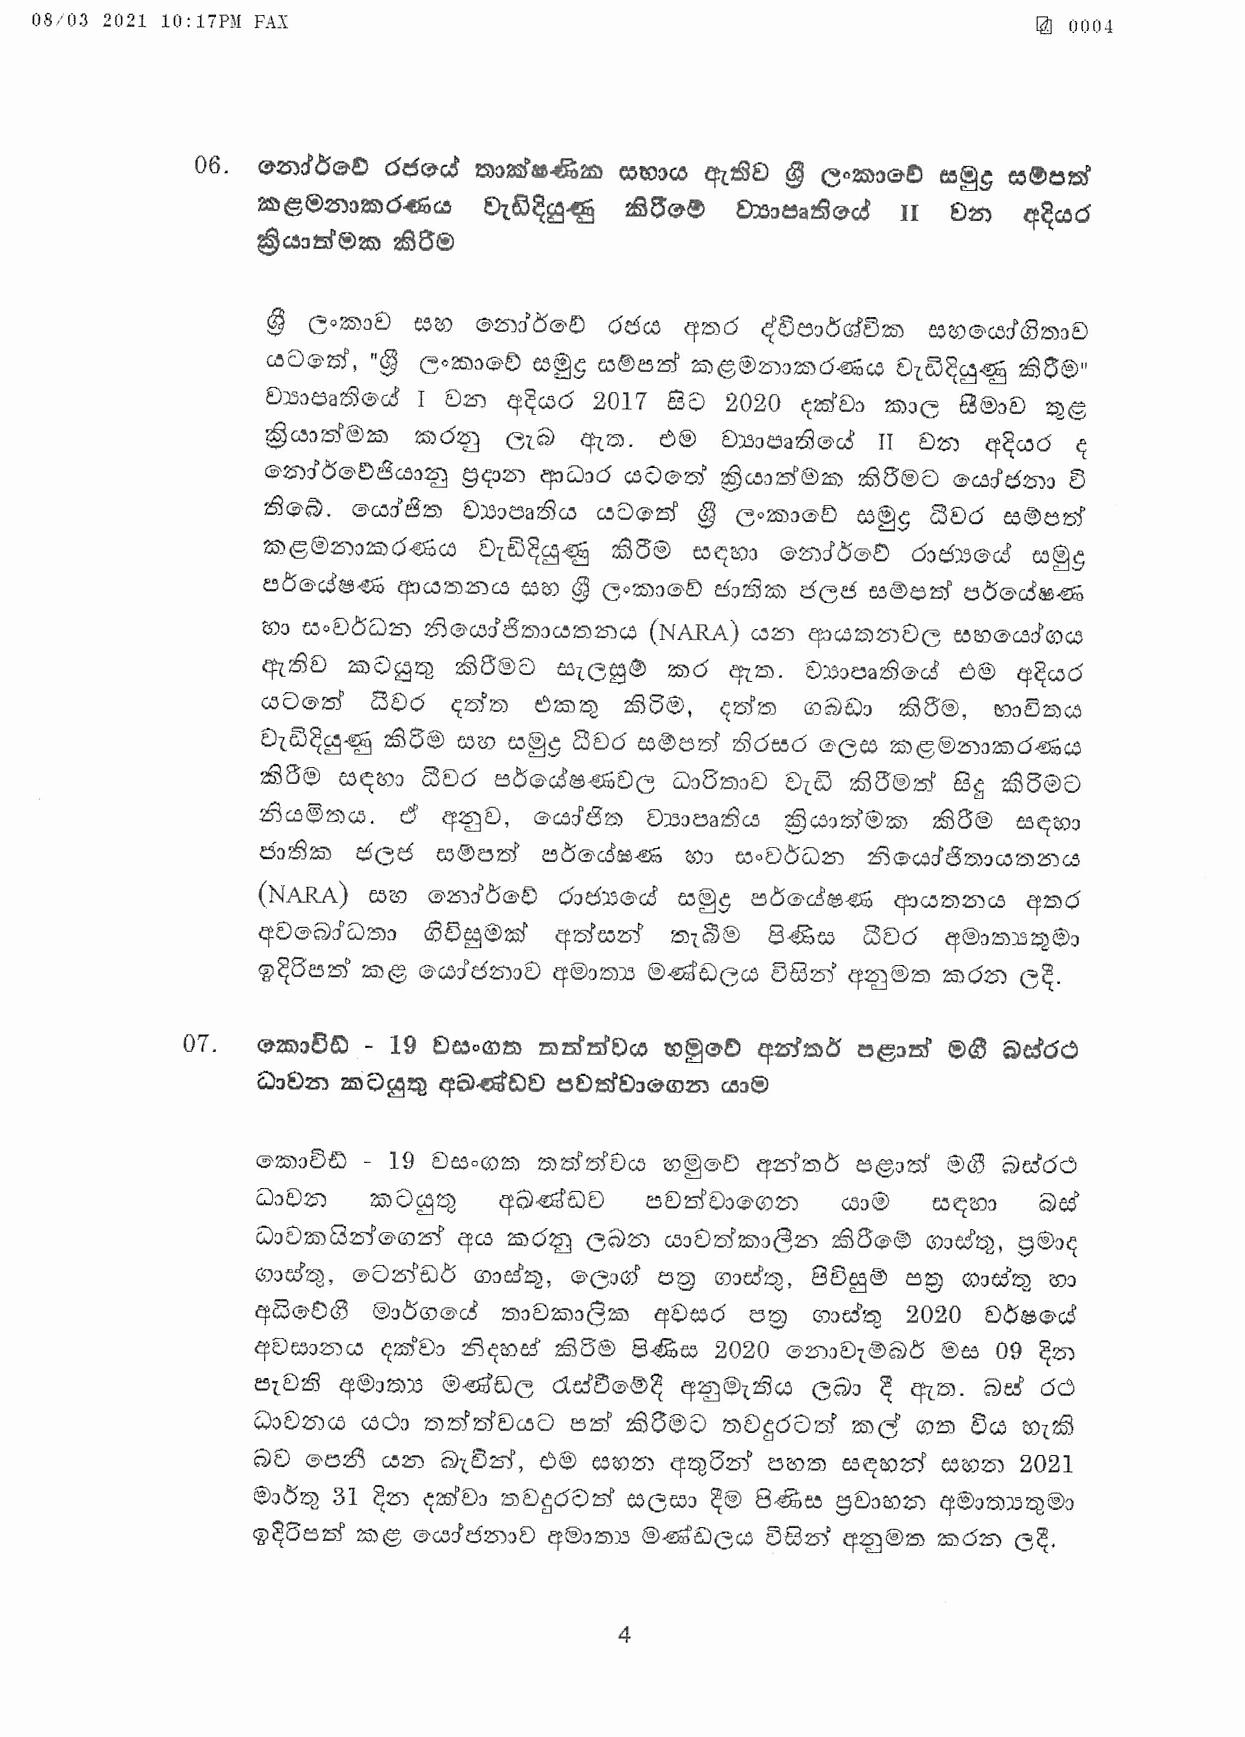 Cabinet Decision on 08.03.2021 page 004